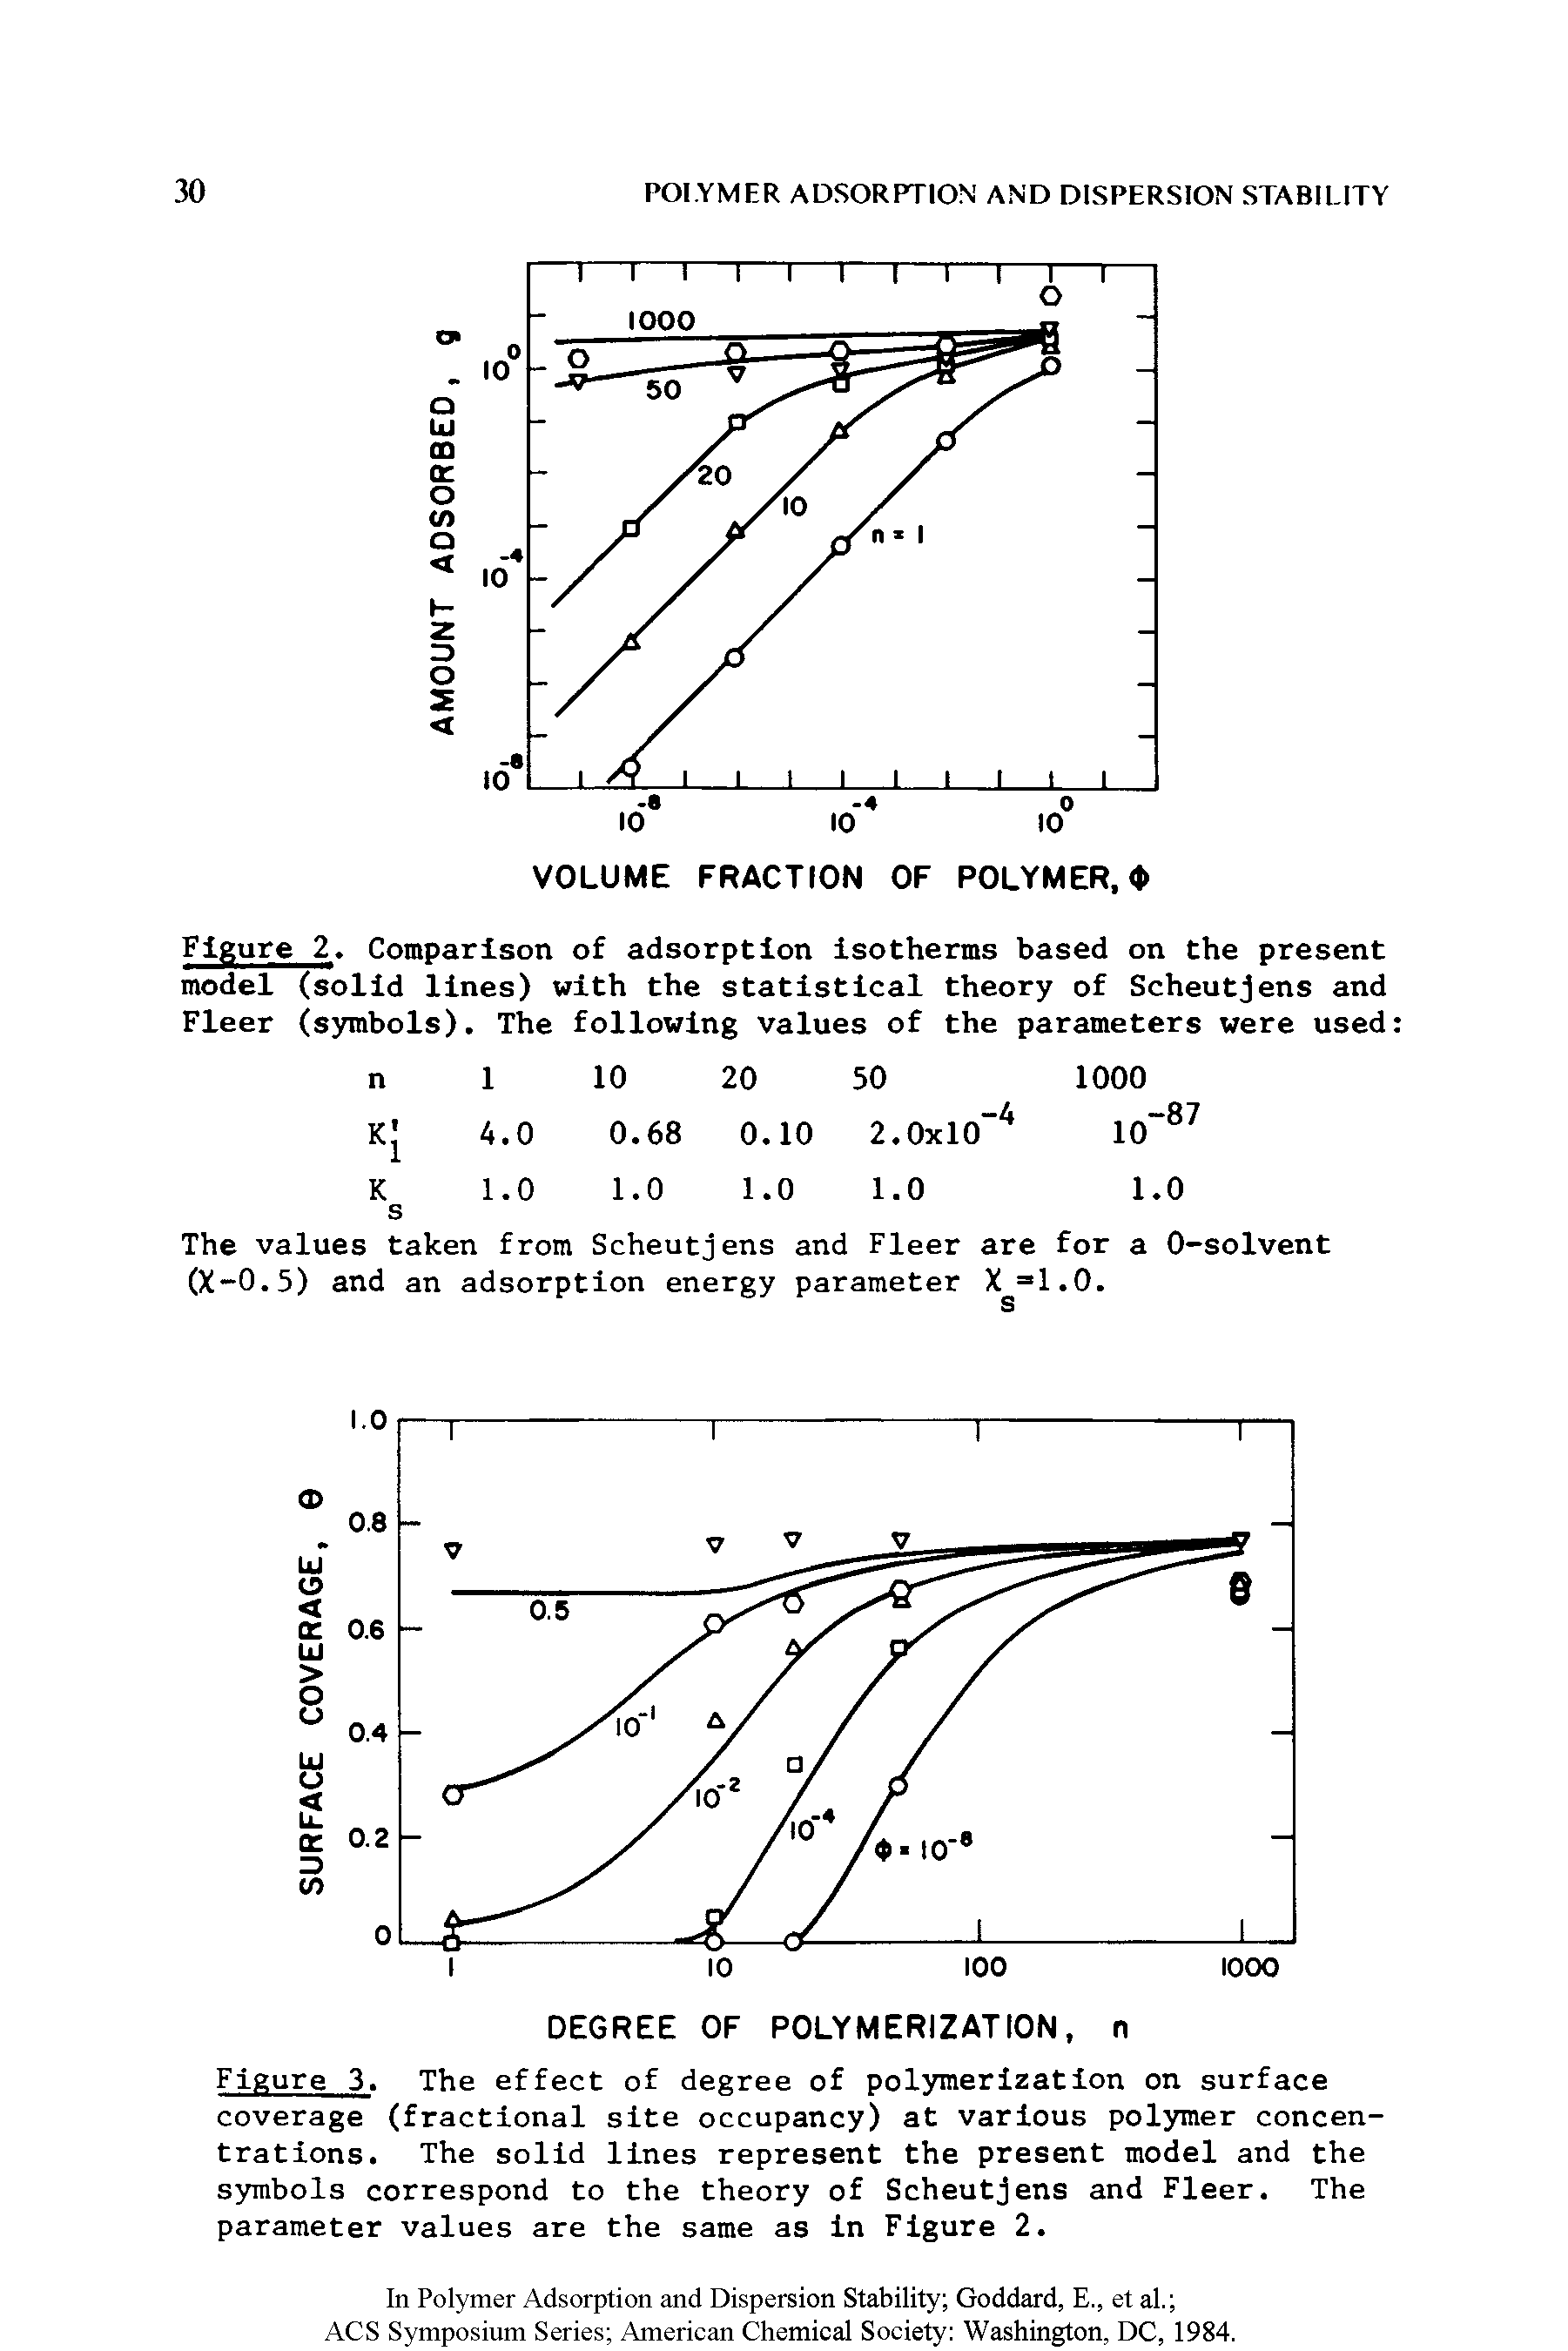 Figure 2. Comparison of adsorption isotherms based on the present model (solid lines) with the statistical theory of Scheutjens and Fleer (symbols). The following values of the parameters were used...